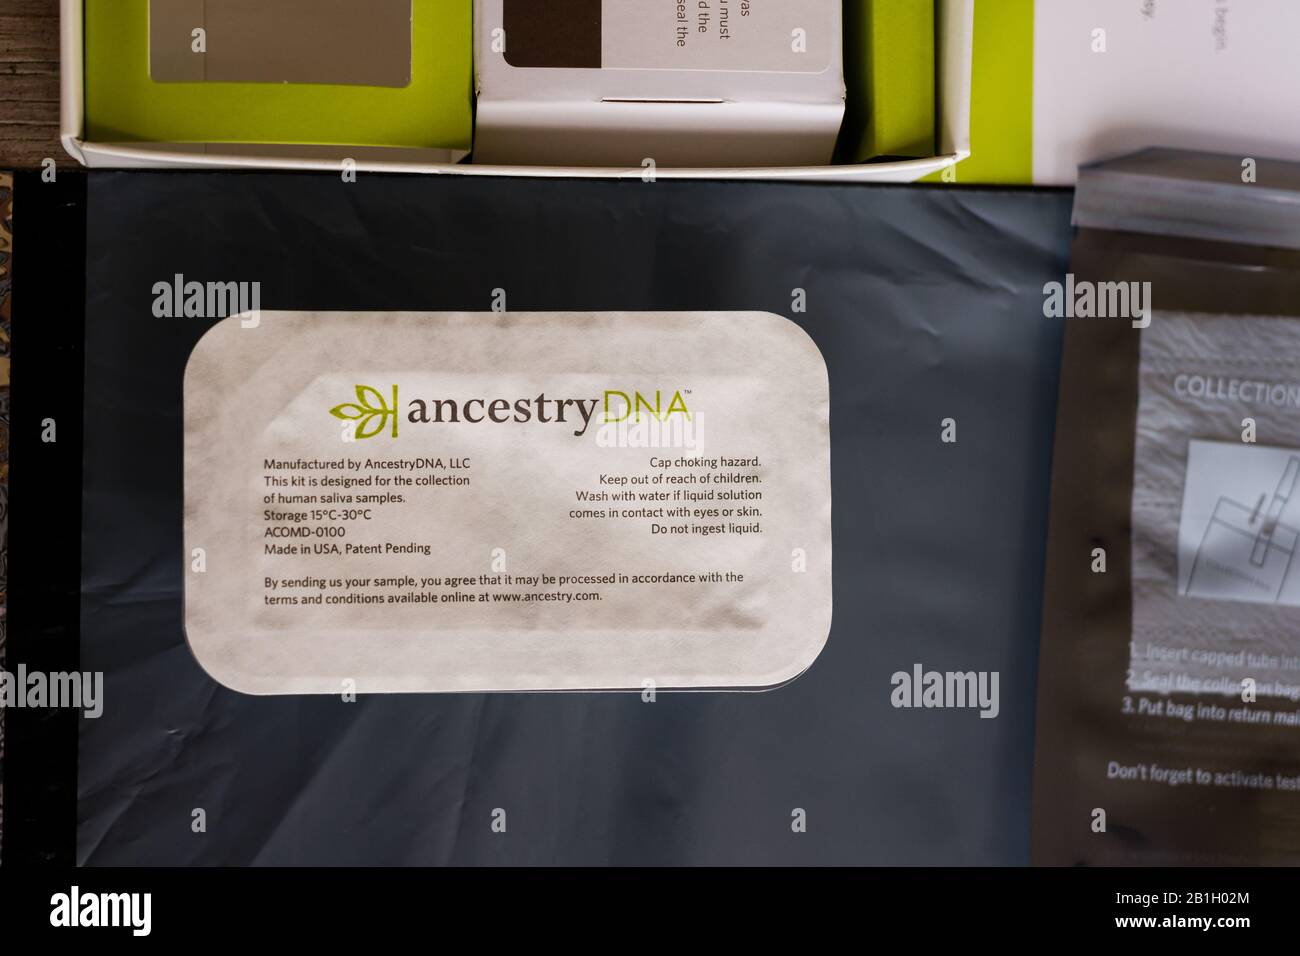 a dna kit by ancestry.com Stock Photo